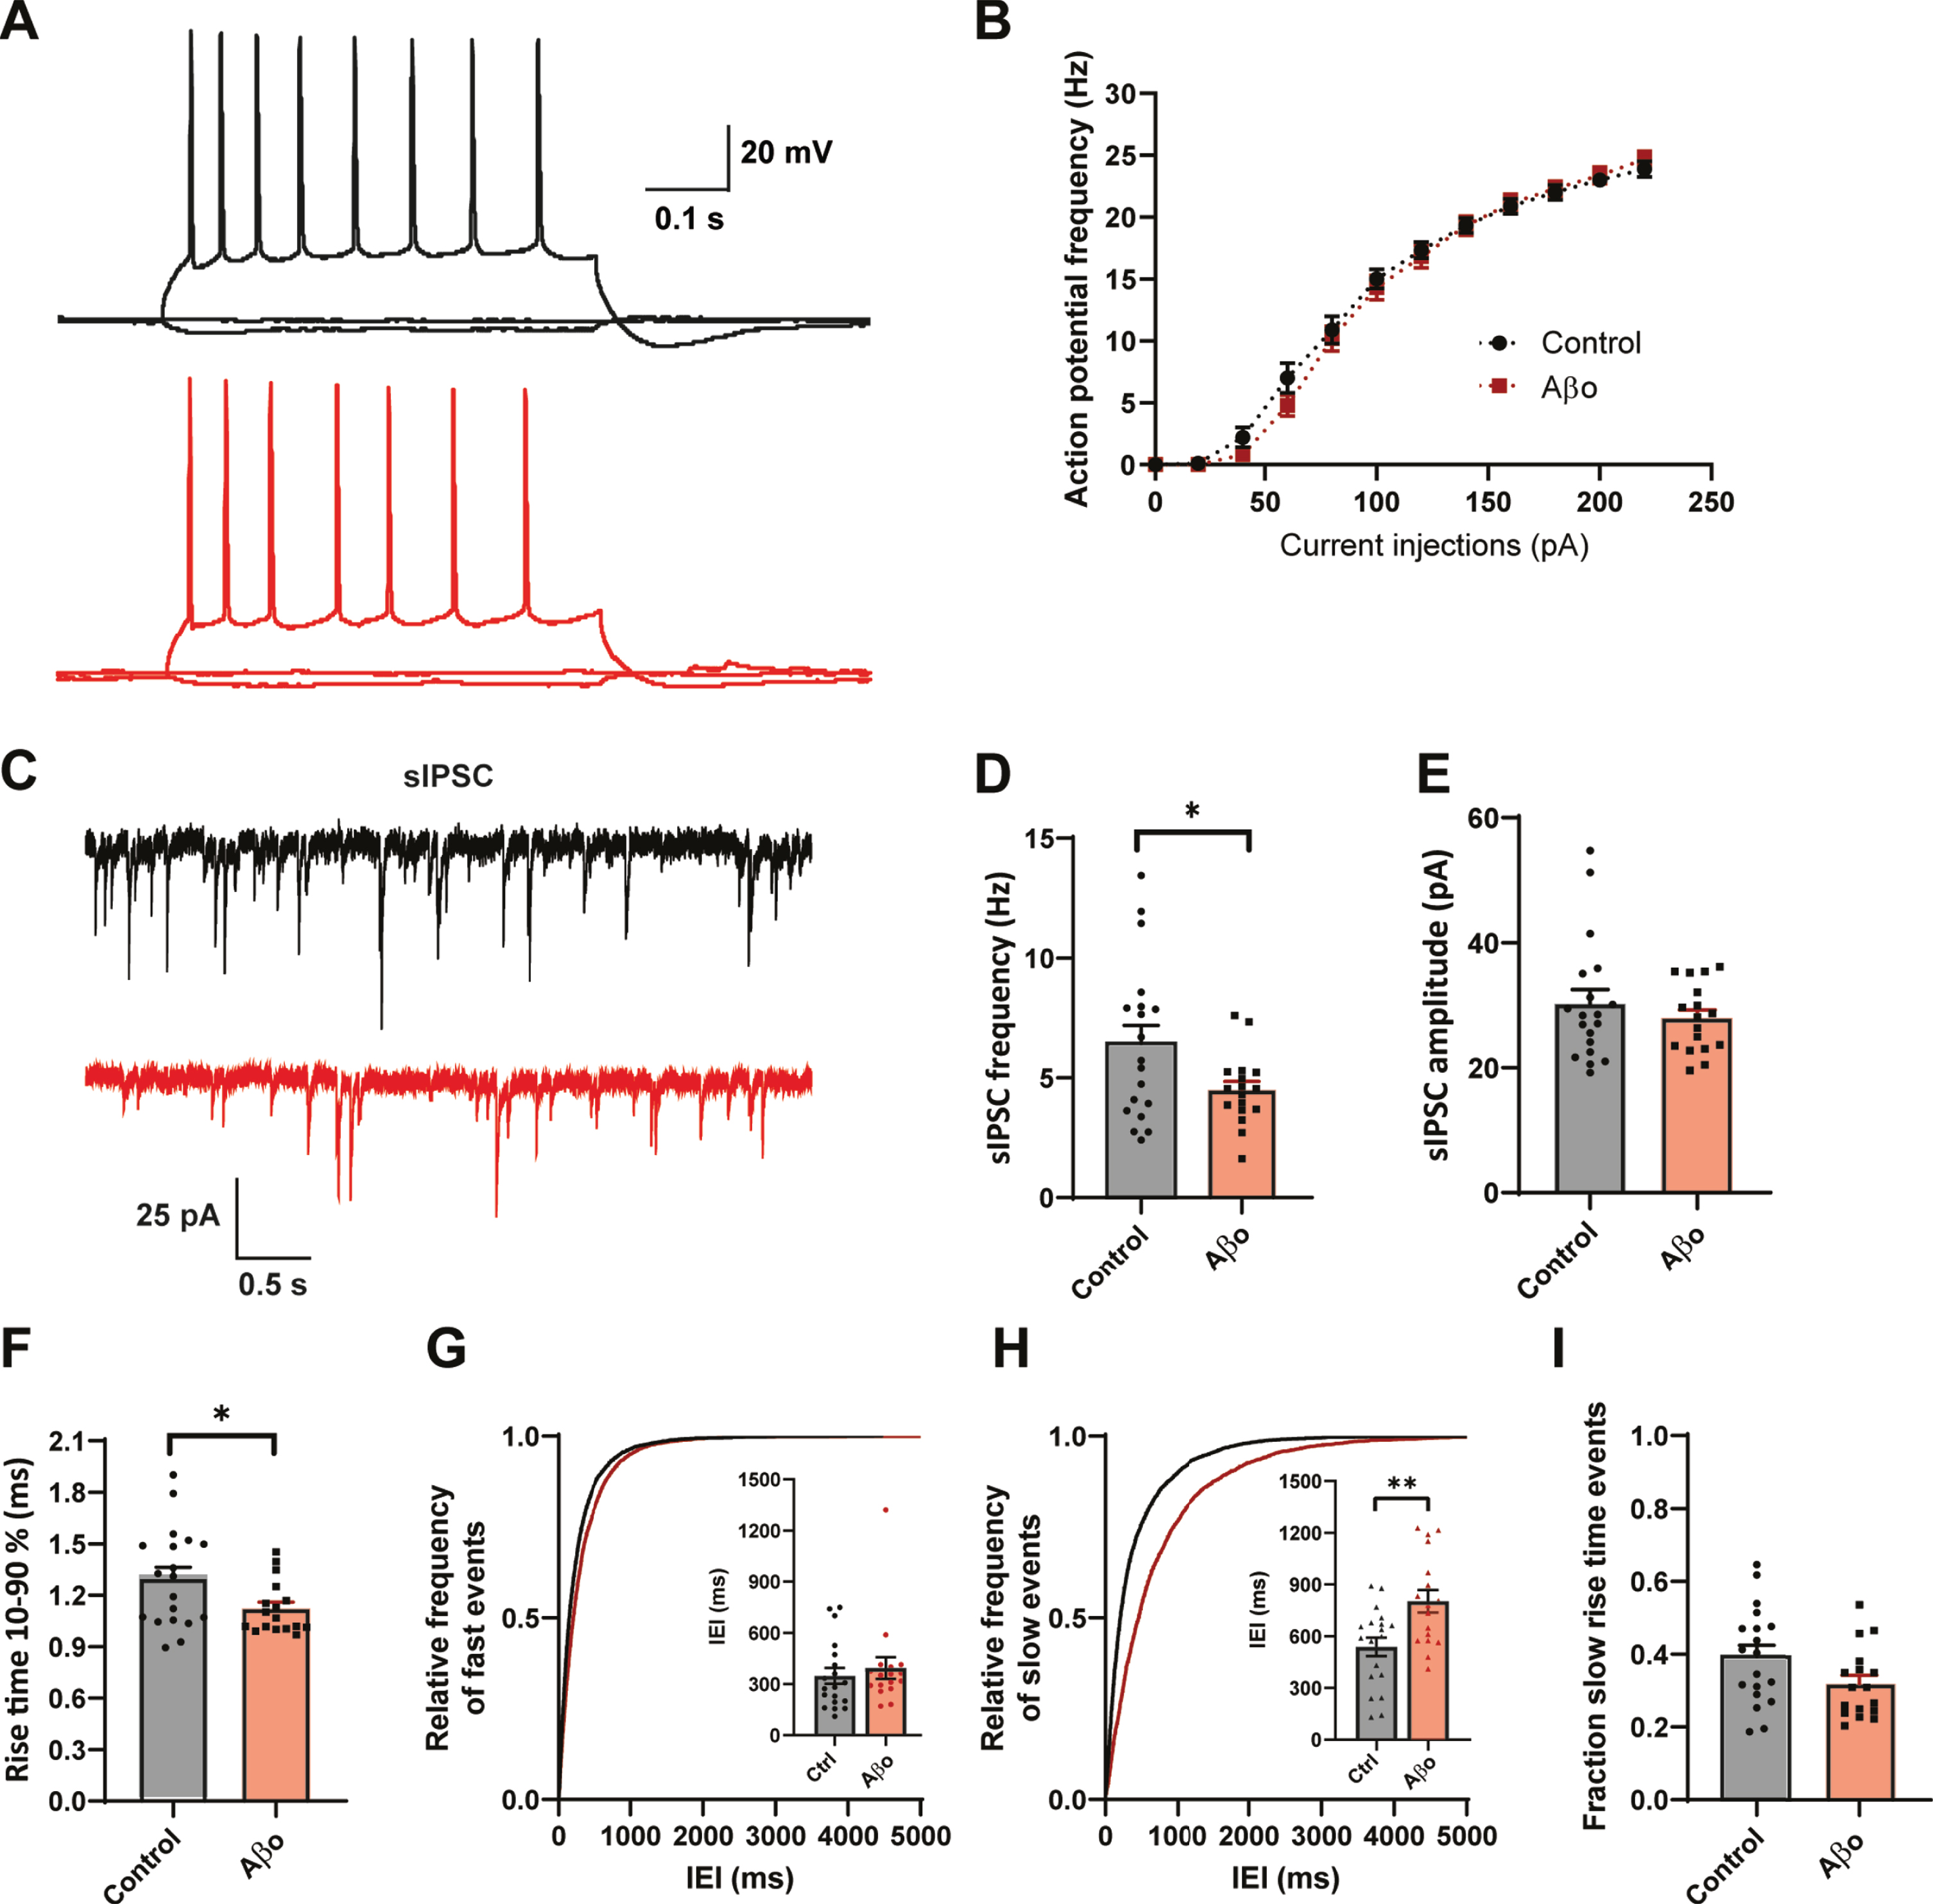 24 h Aβ oligomer treatment reduces dendritic inhibition in organotypic hippocampal slices. A) Example traces of action potentials after current injections. B) No change in action potential firing rates in control slices (black, n = 20, N = 6) and Aβ-treated slice (red, n = 18, N = 6) with increasing current injections. C) Representative sIPSC recording from control (black) and Aβ-oligomer treated (red) slices. D, E) Aβ reduces sIPSC frequency (D; p = 0.028, t), but leaves sIPSC amplitude (E; p = 0.40, t) unchanged. F) Rise time of sIPSCs was faster in the Aβ-treated slices (p = 0.029, t). G, H) Cumulative distribution of inter-event intervals (IEIs) of fast rise time (G) and slow rise time (H) events (p = 0.82 and p = 0.003, Sidak). The inserts show the mean IEI (I) Fraction of sIPSCs with slow rise times in Aβ-treated and control slices (p = 0.08, t). (Data in C–I: control n = 21, N = 6 Aβ n = 20, N = 6).